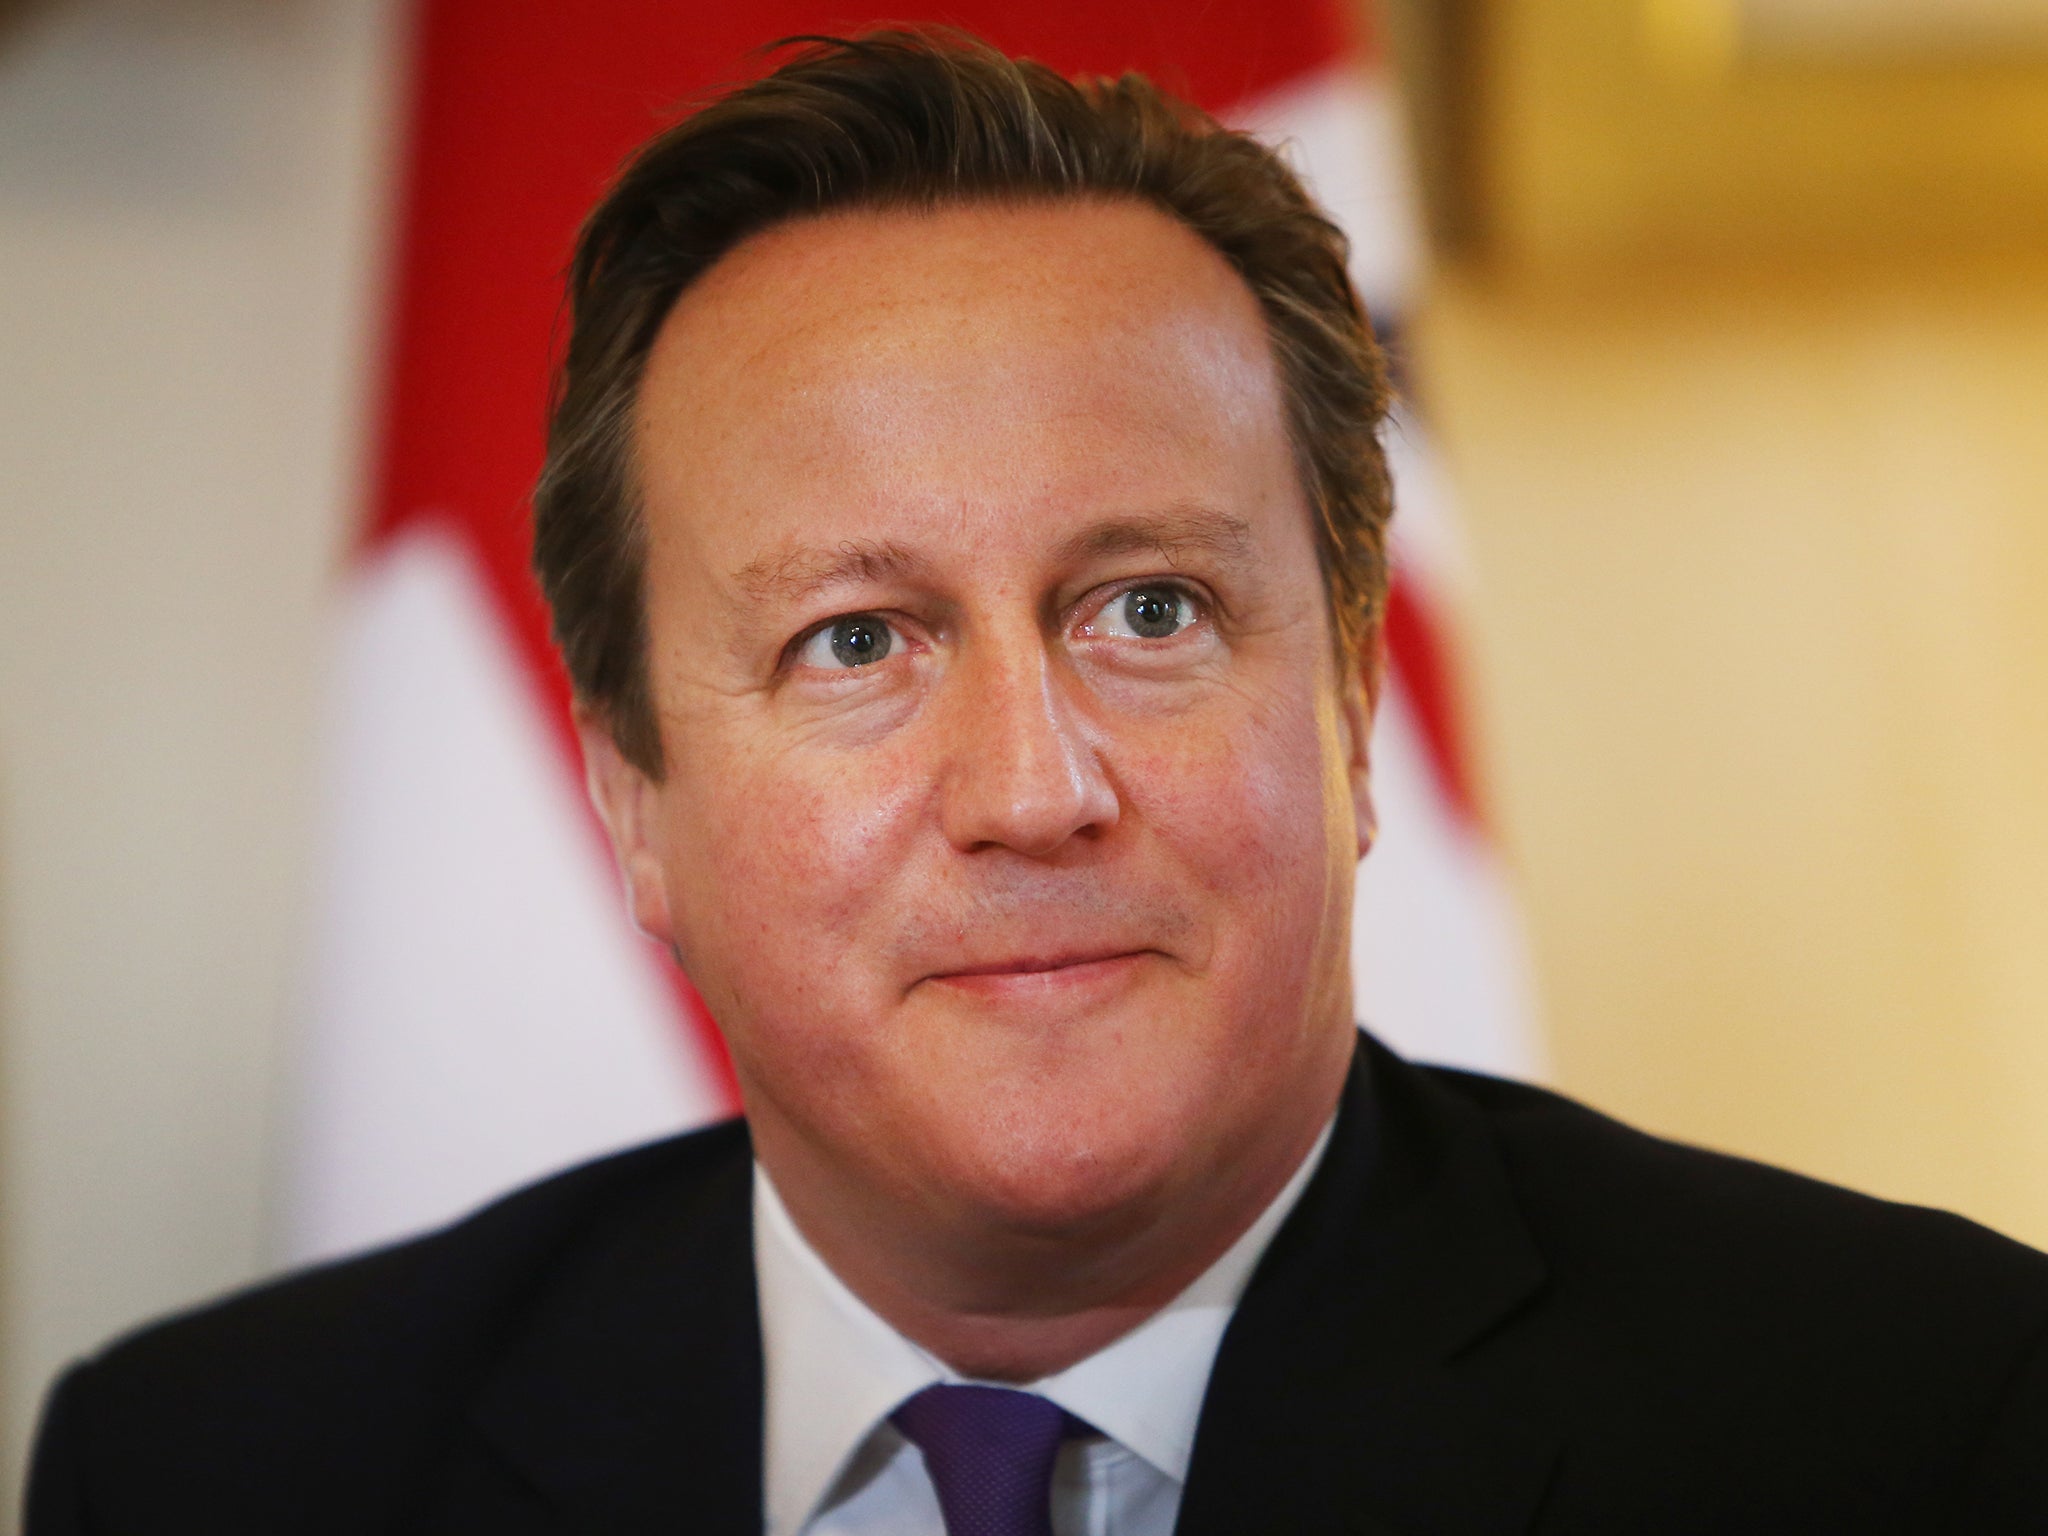 “If [Greece] vote No, I find it hard to see how that is consistent with staying in the euro" says Cameron